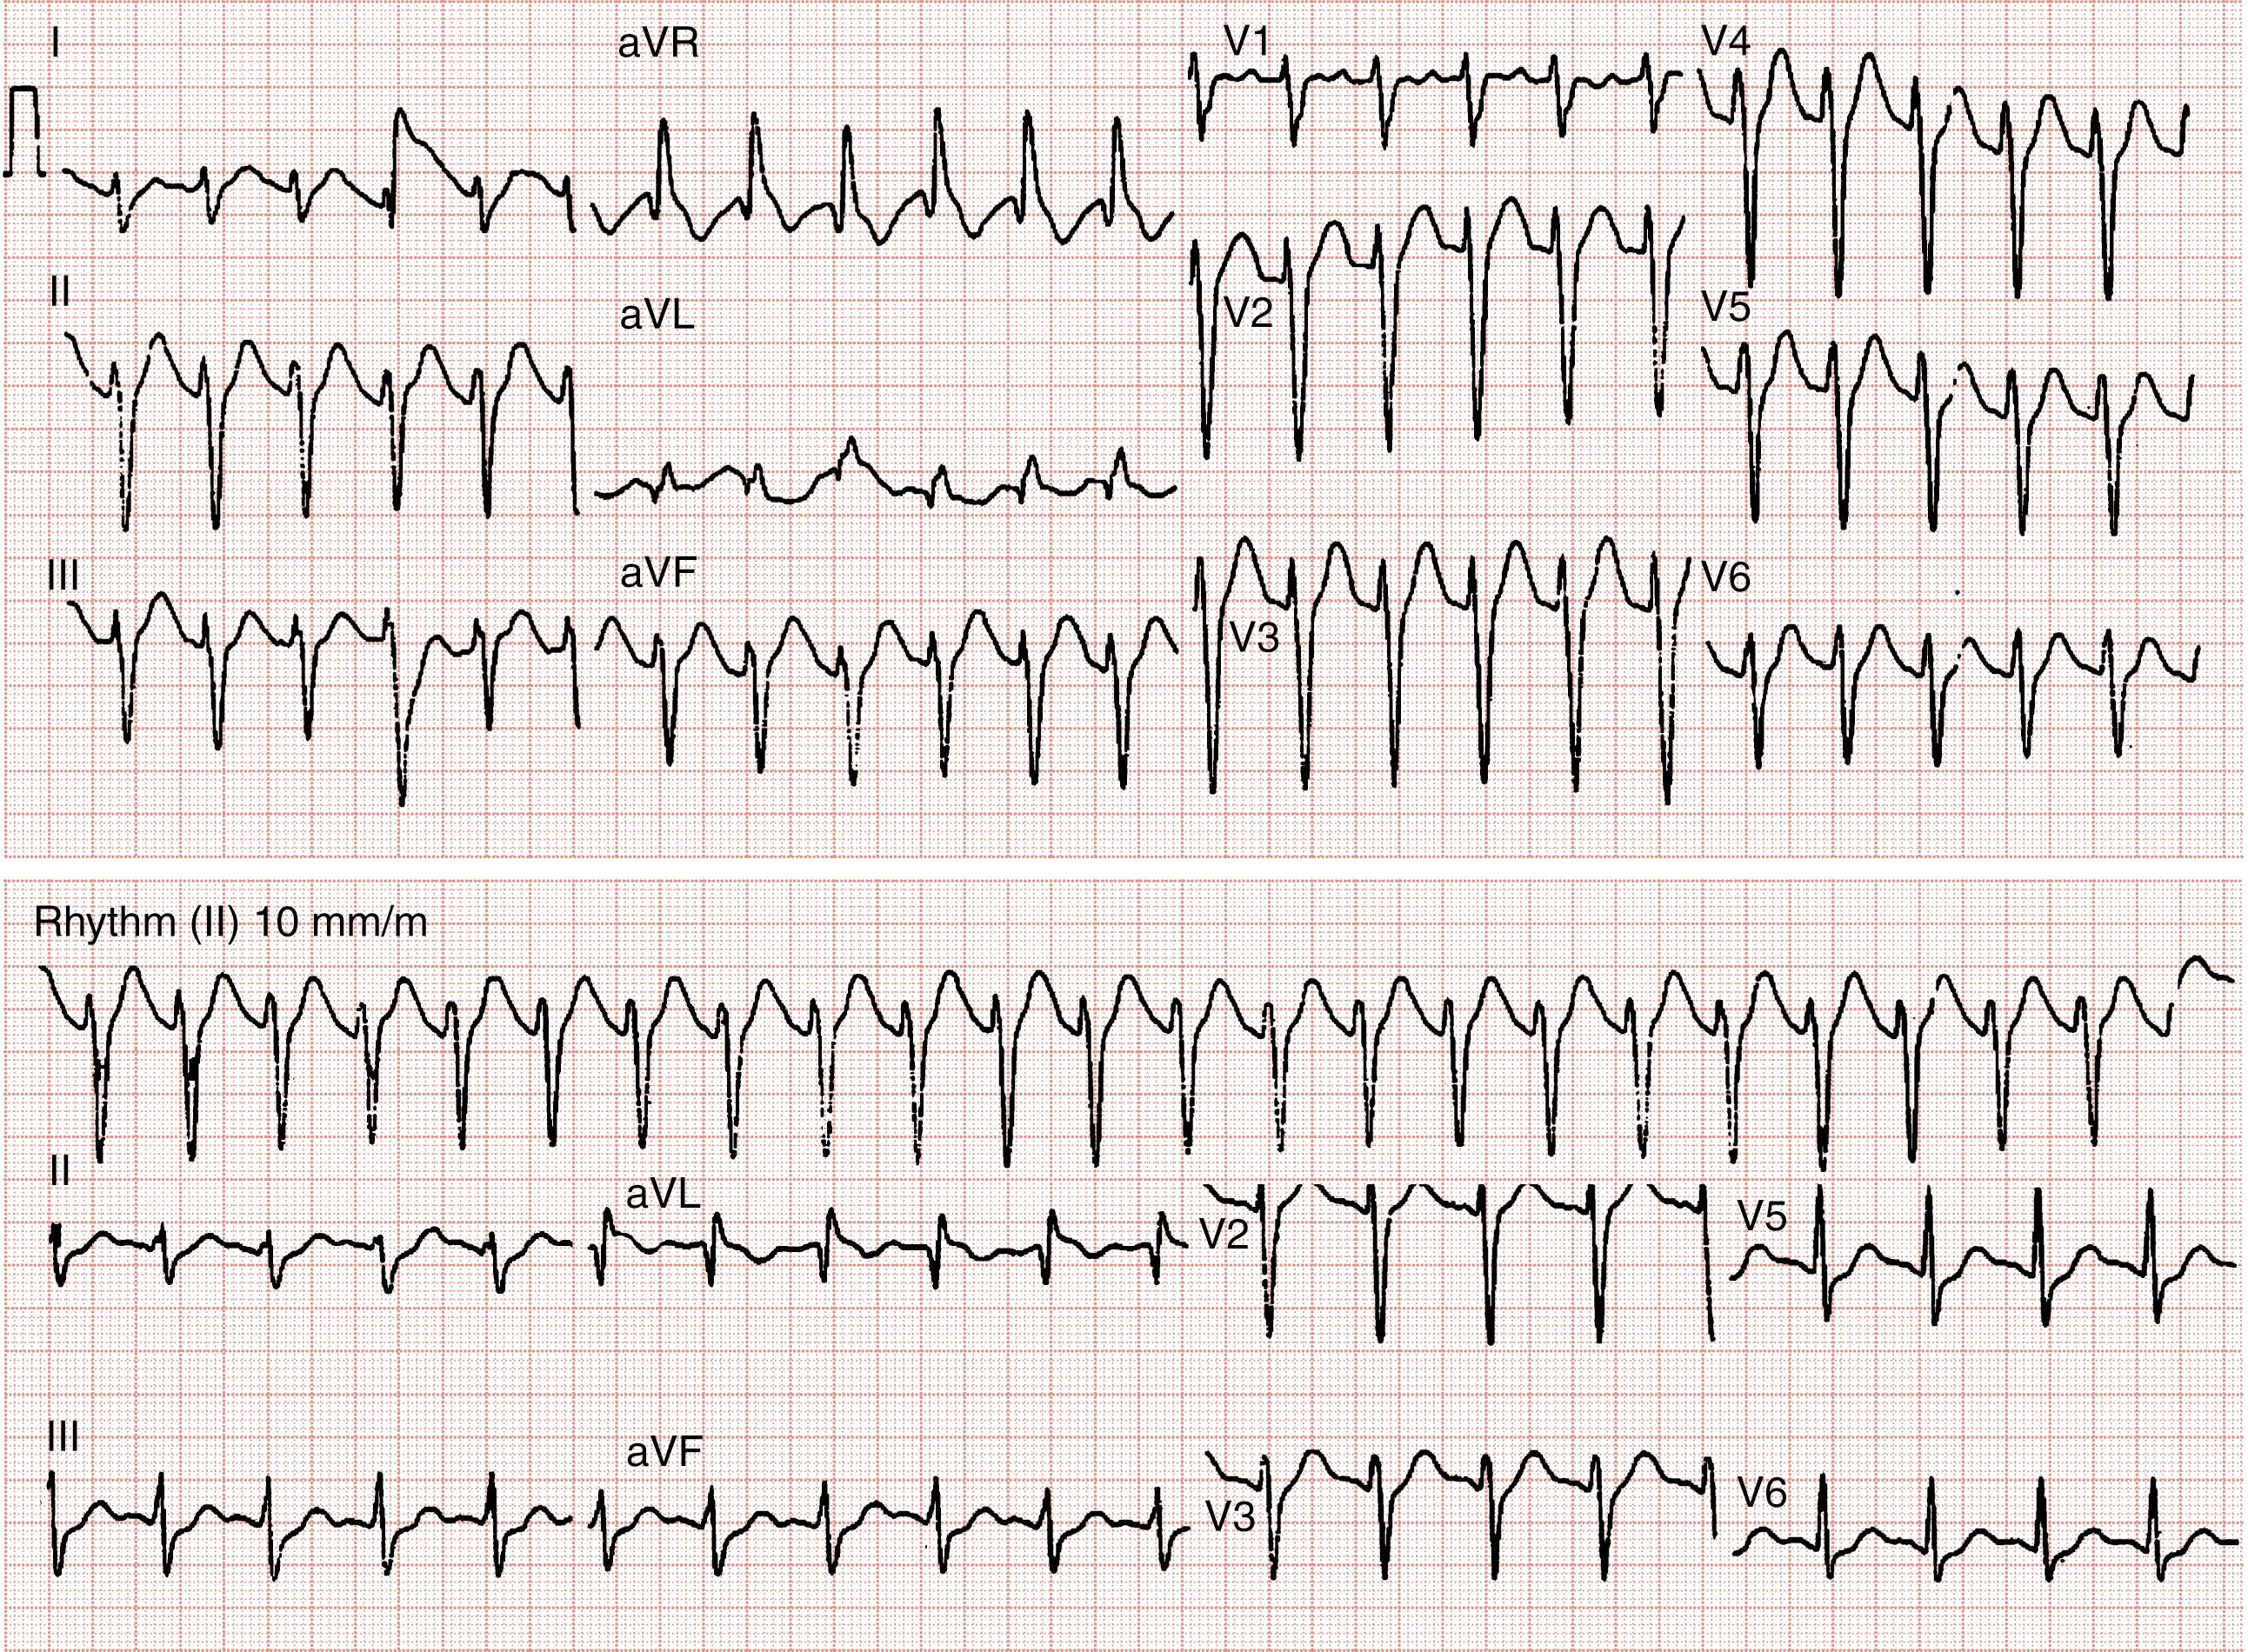 Fig. 141.2, Top, Initial 12-lead electrocardiogram (ECG) demonstrating substantial intraventricular conduction delay (QRS 141 milliseconds). Bottom, Repeated ECG after bicarbonate therapy.